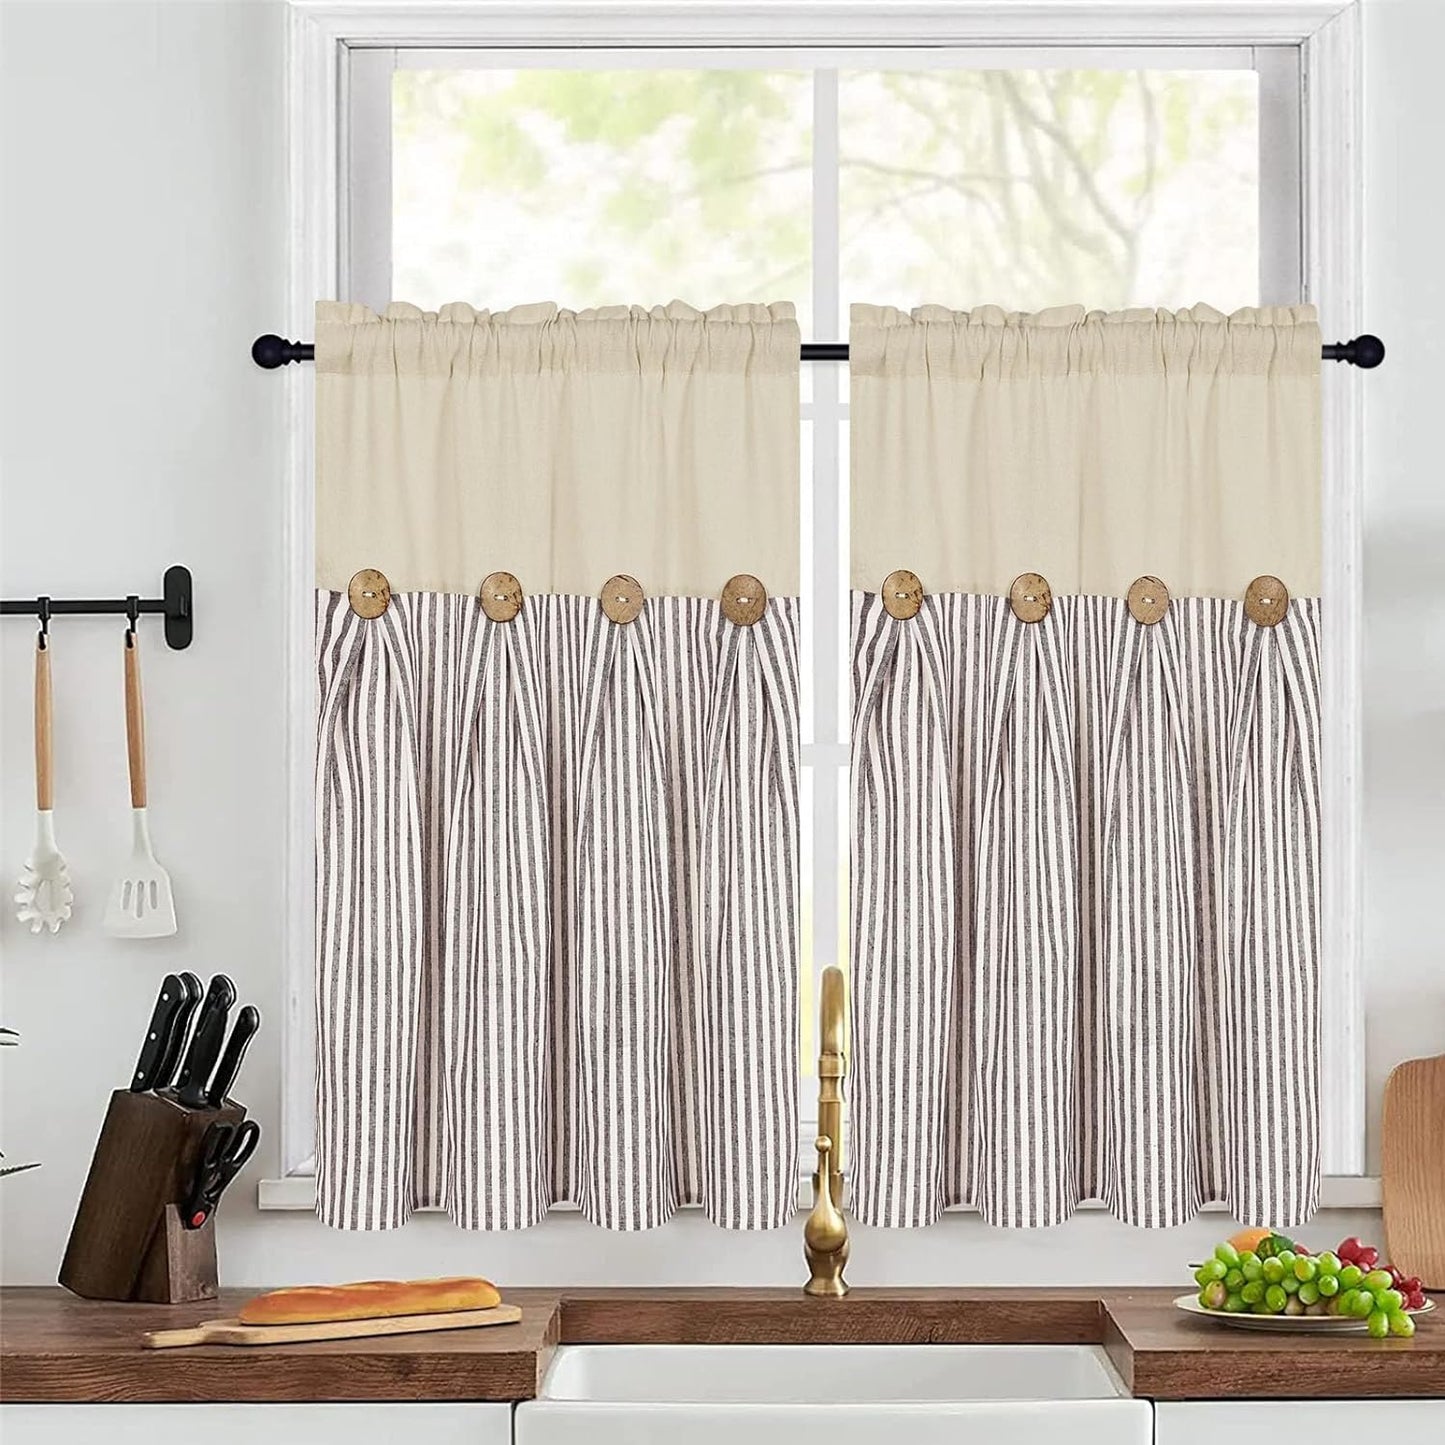 Cotton Linen Farmhouse Curtains Boho Rustic Button Curtains Natural and Dark Grey Stripe Color Block Curtain Rod Pocket & Back Tab Window Drapes for Bedroom Living Room(52 X 84 Inch, 2 Panels)  BLEUM CADE Brown Stripe W26 X L36 